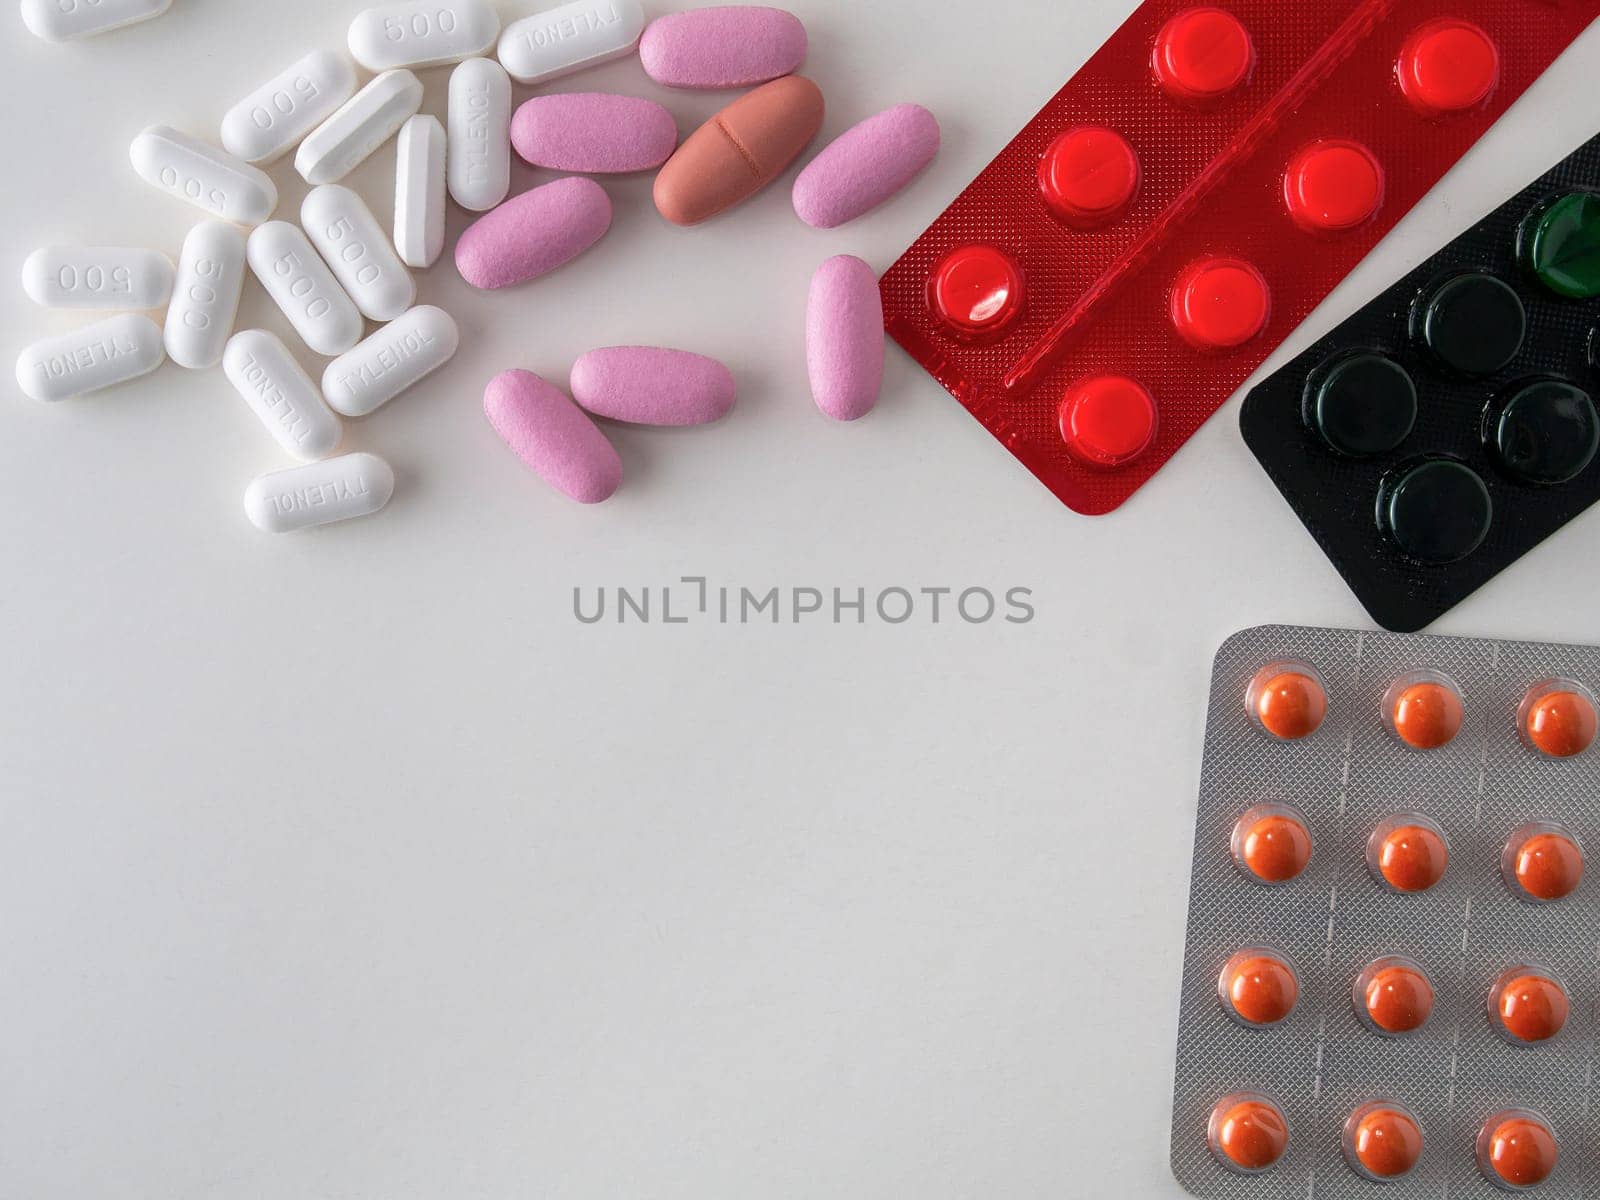 multicolored medical pills and packs of pills on a white table by Andre1ns